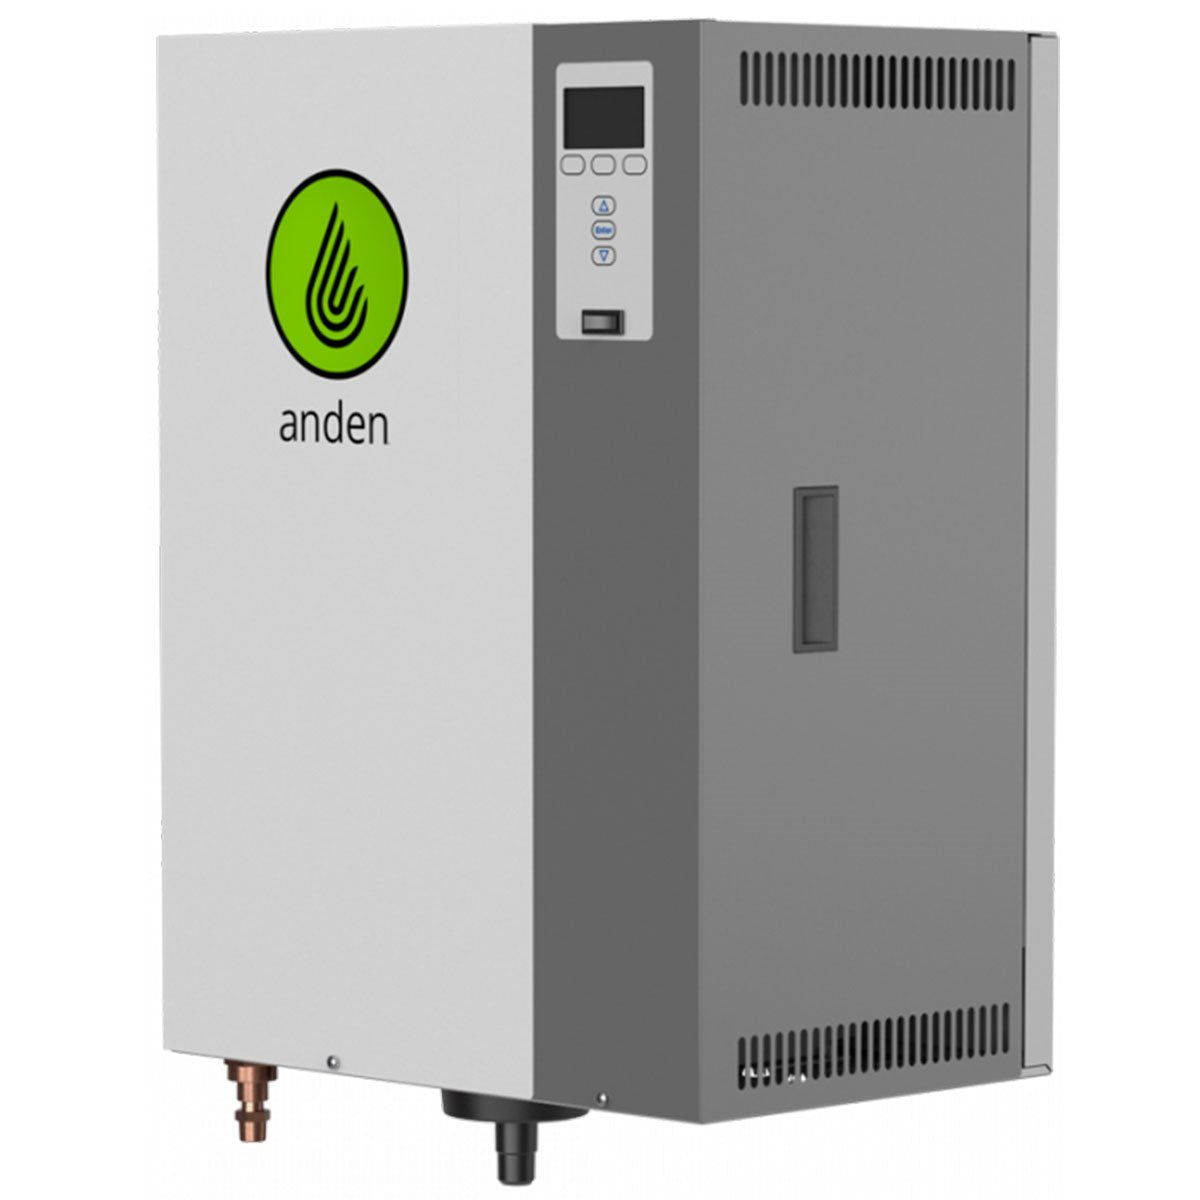 Anden High Capacity Steam Humidifier